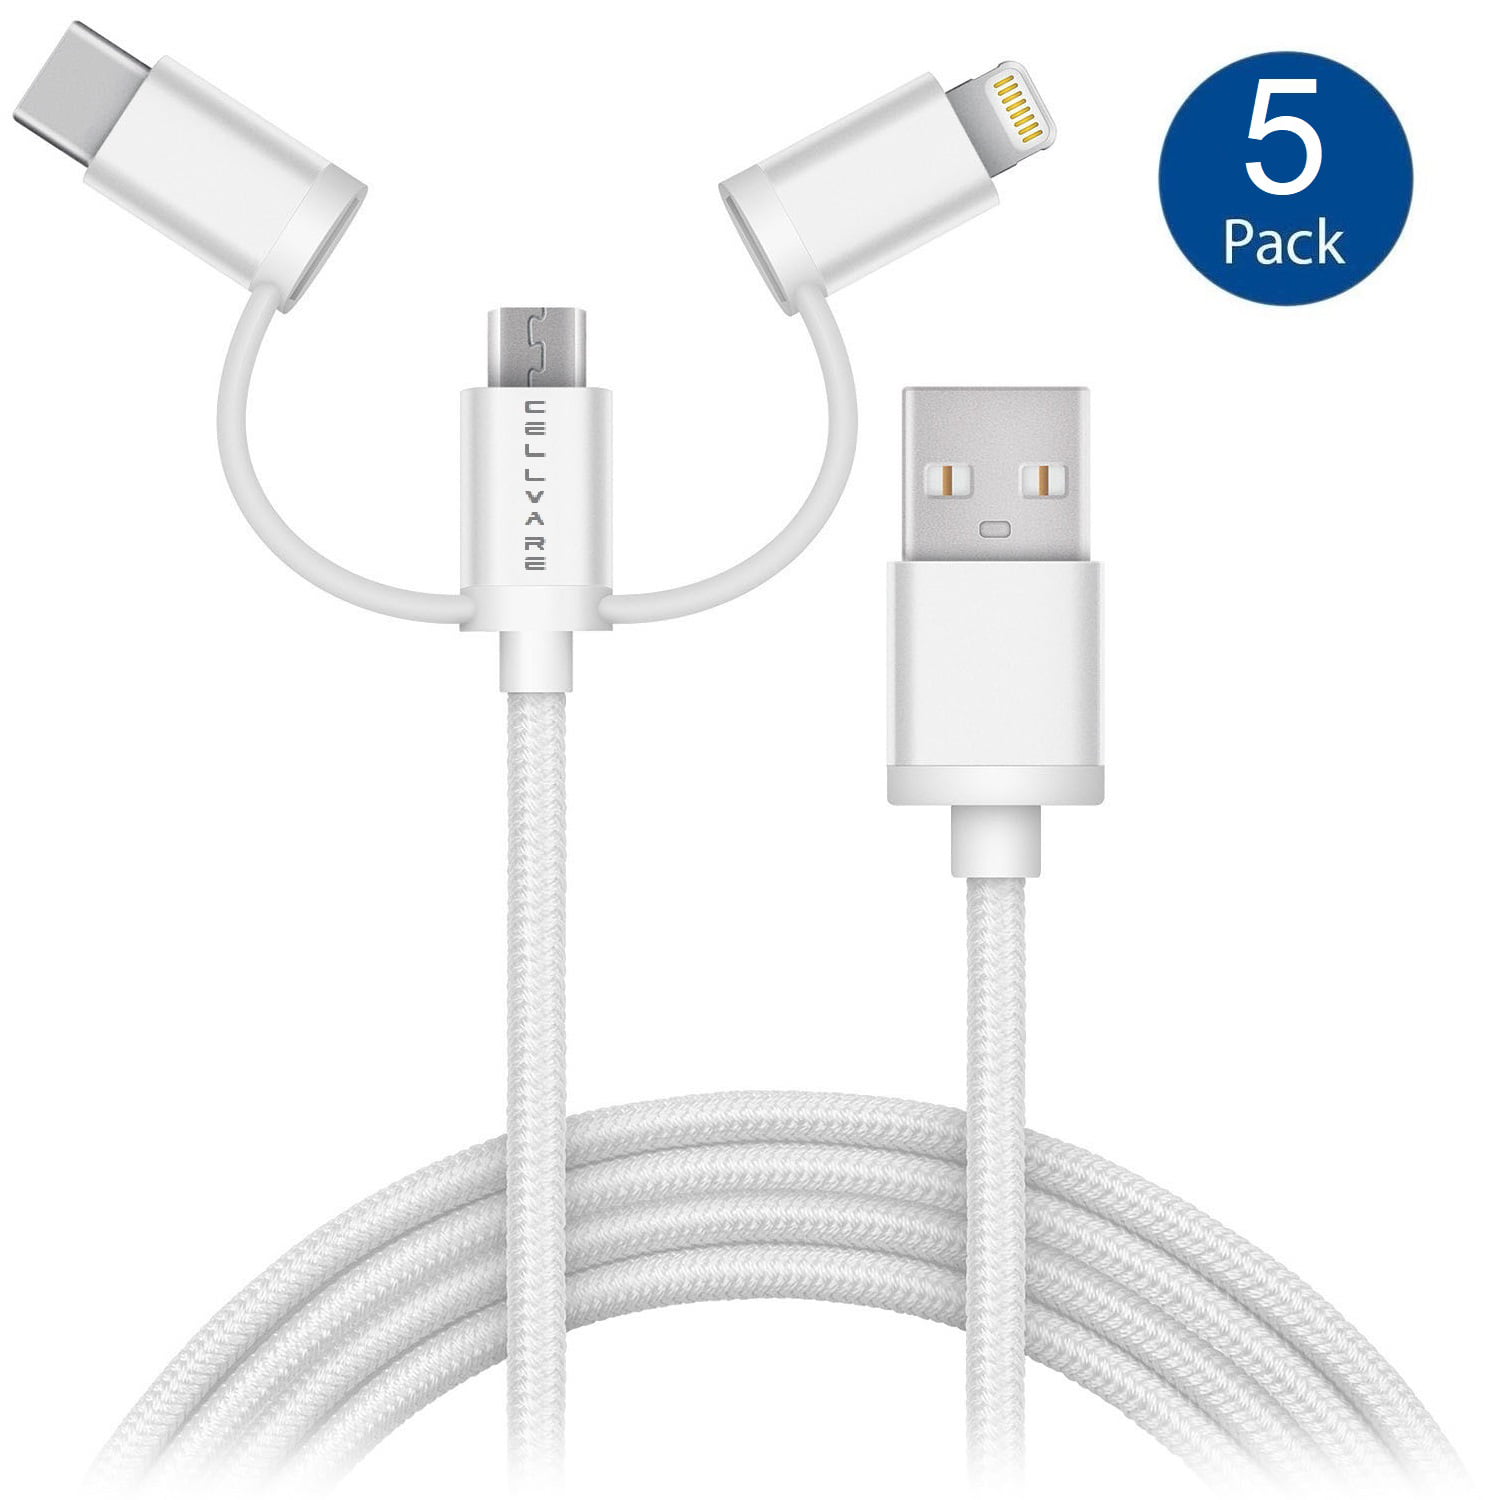 Multi Charger Cable 3 in 1 Charging Cable Universal Charger Cord with Type C/Micro USB Port Compatible with Cell Phone Tablets More SEDSED Futur-AMA Bender Multi Charging Cable 